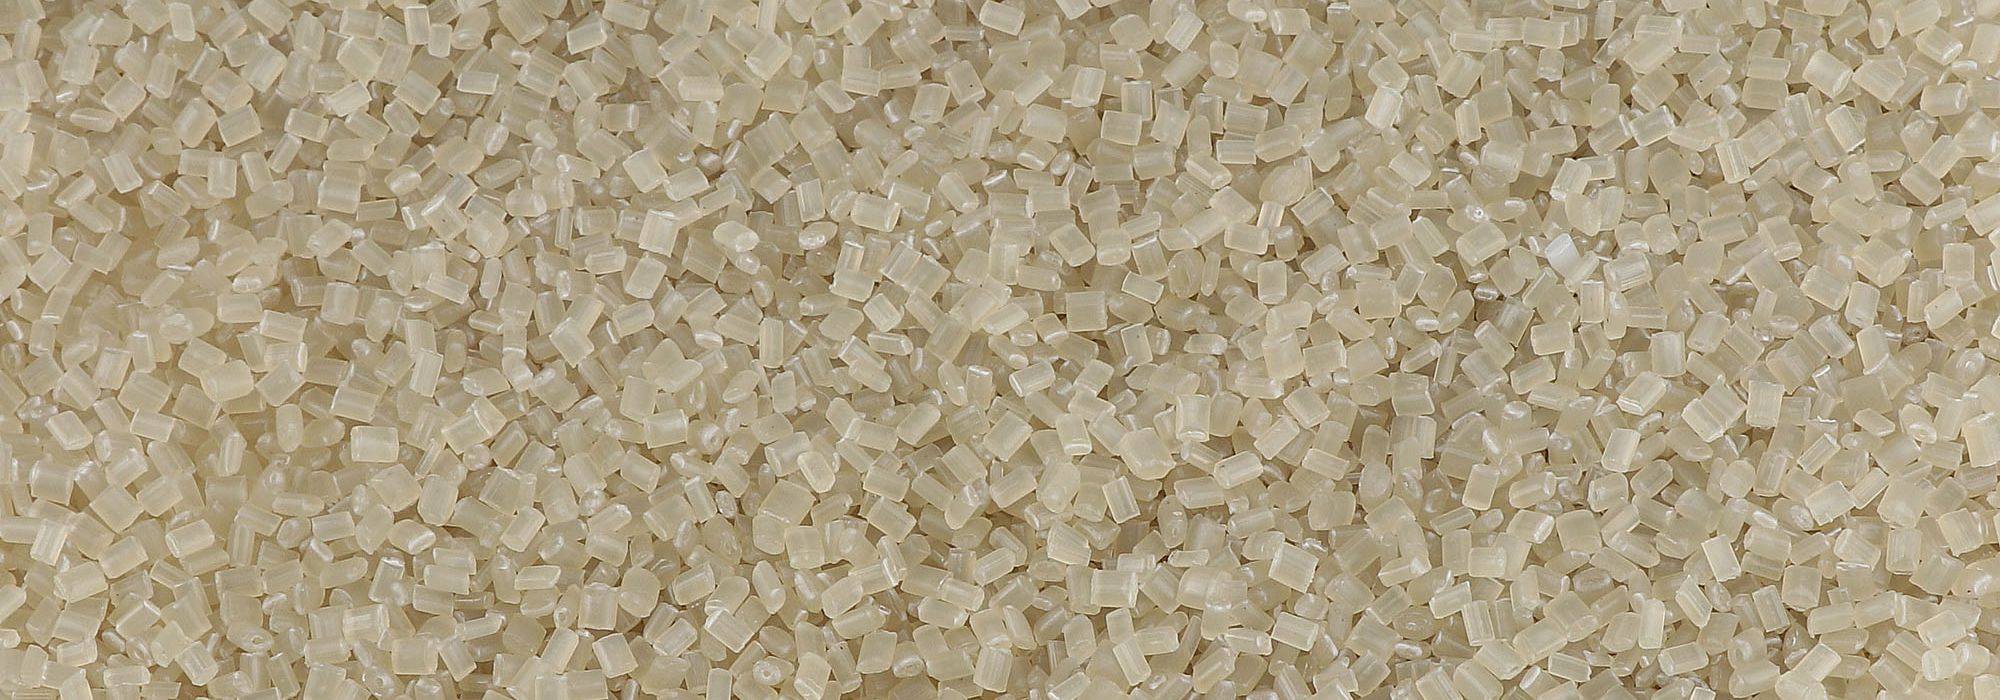 Plastic Recyclate Pellets - Post Consumer Recycling r-PP - Polypropylen